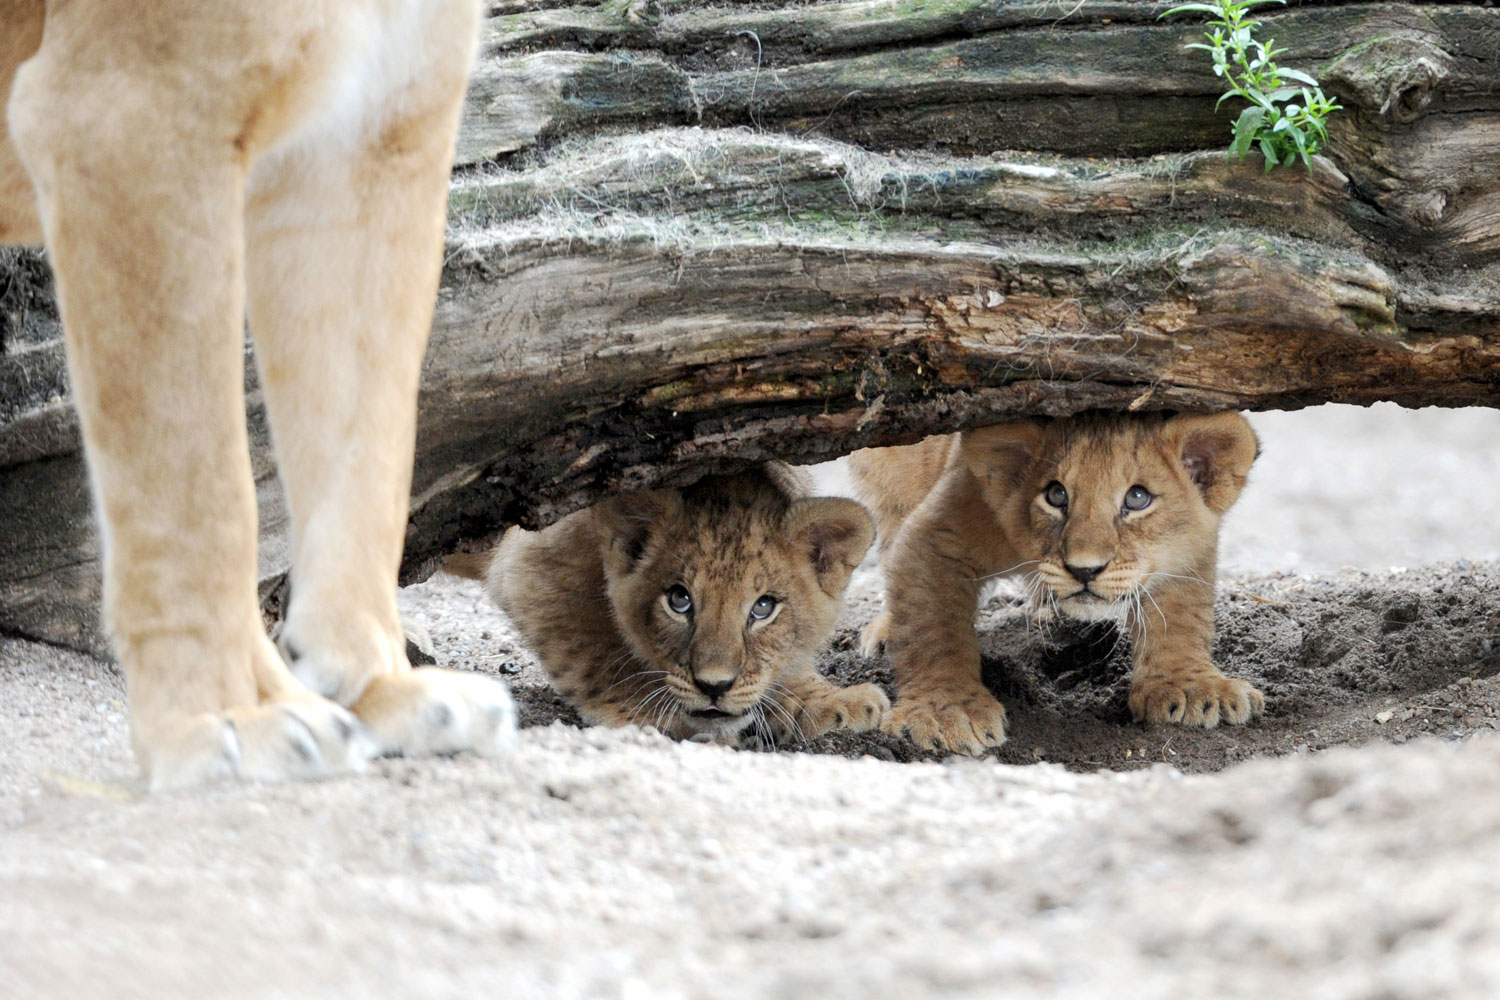 Two lion cubs and their mother Tembesi explore their enclosure at Animal Park Hagenbeck in Hamburg, Germany.